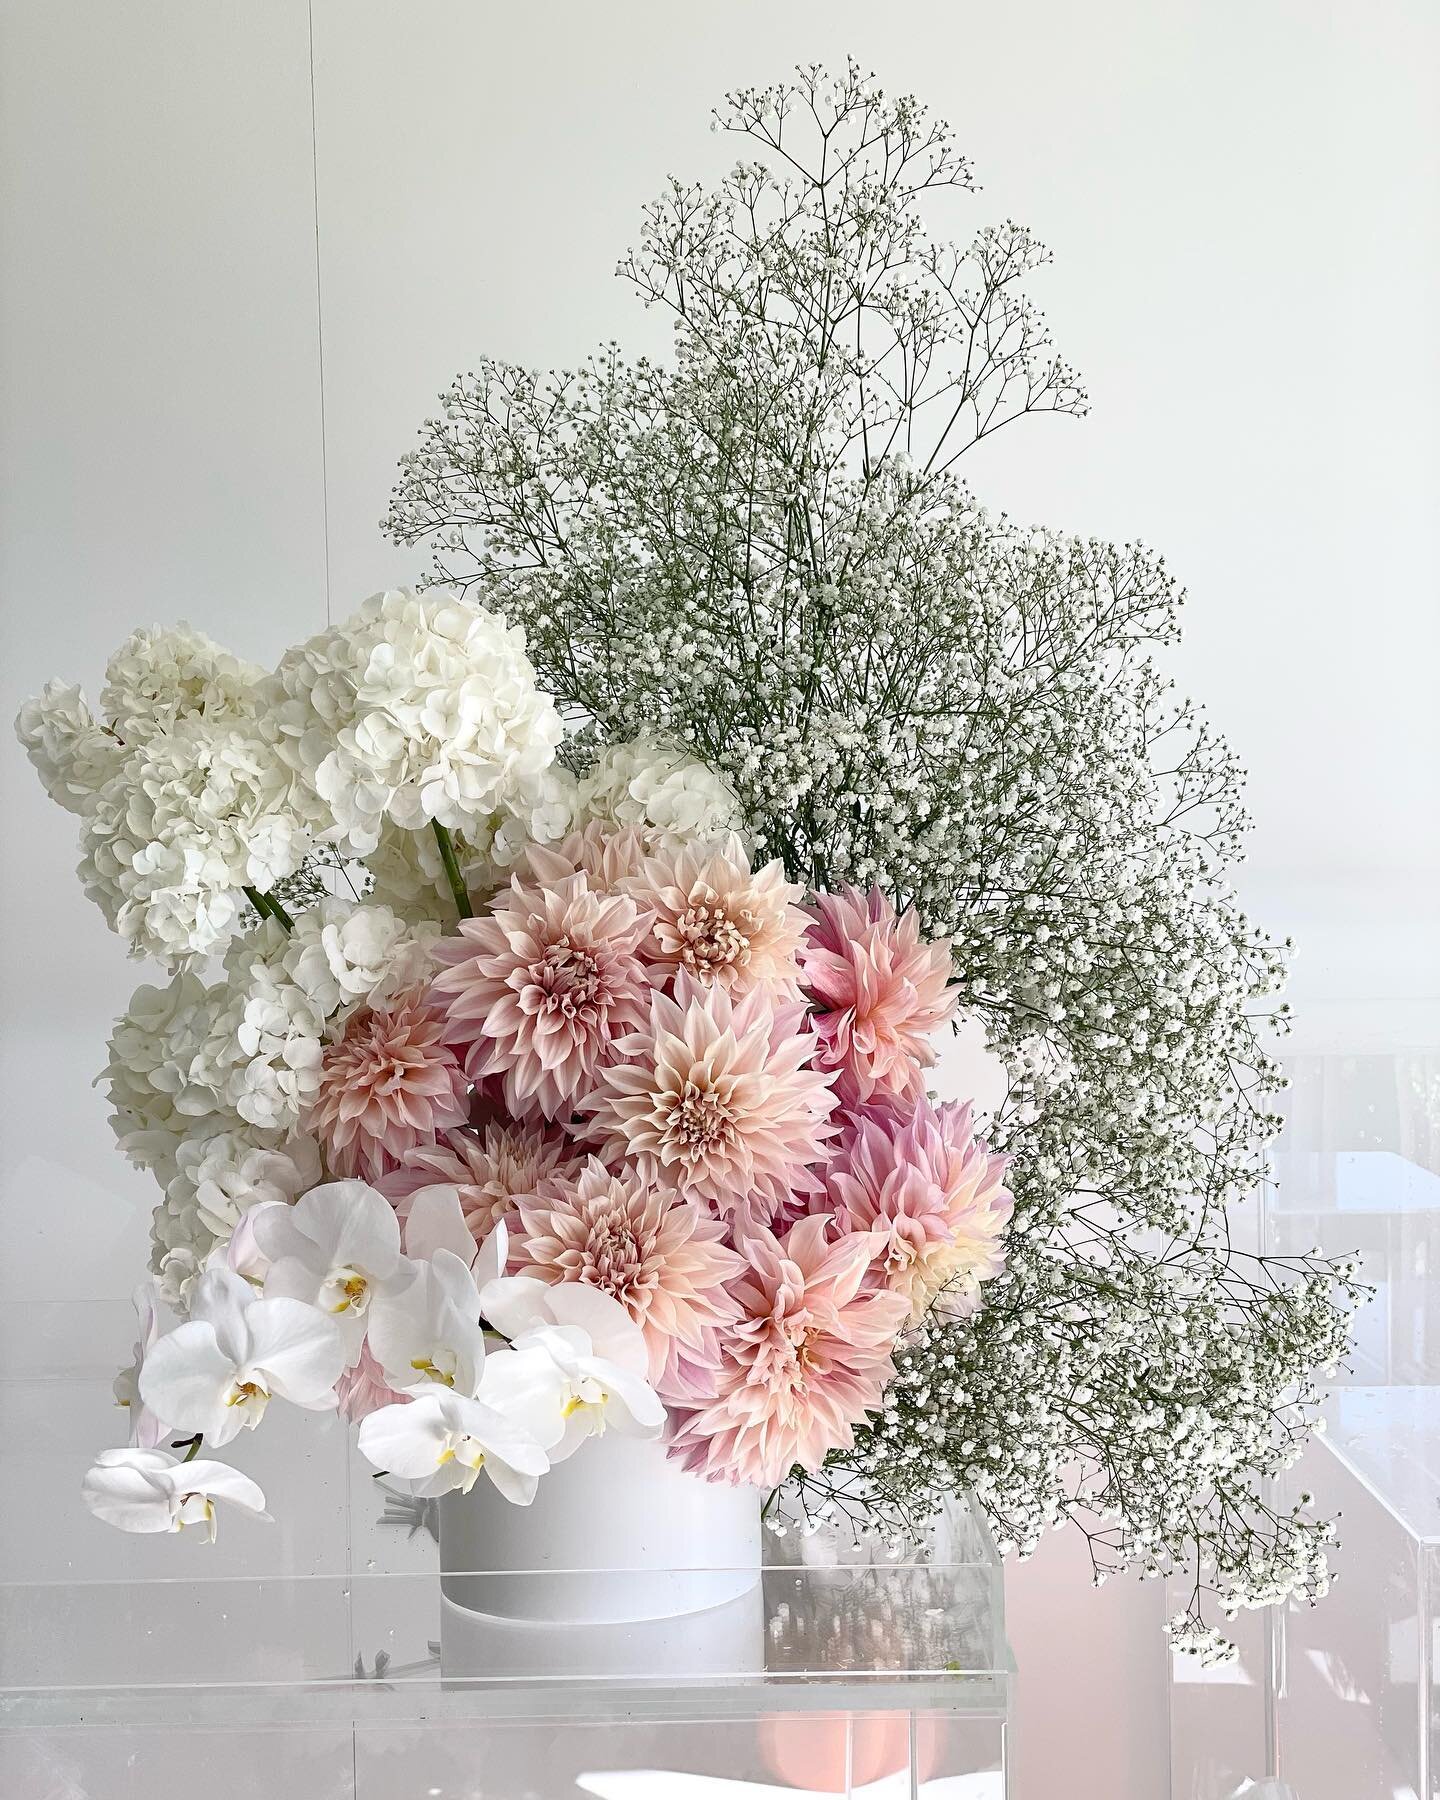 More beautiful bar florals for a special birthday, but how stunning are those dahlias!

#barflorals #eventflorals #dahlias #florals #eventflorist #eventstyling #libertyeventstyling #so&ntilde;adora #sonadora_nz #blush #white